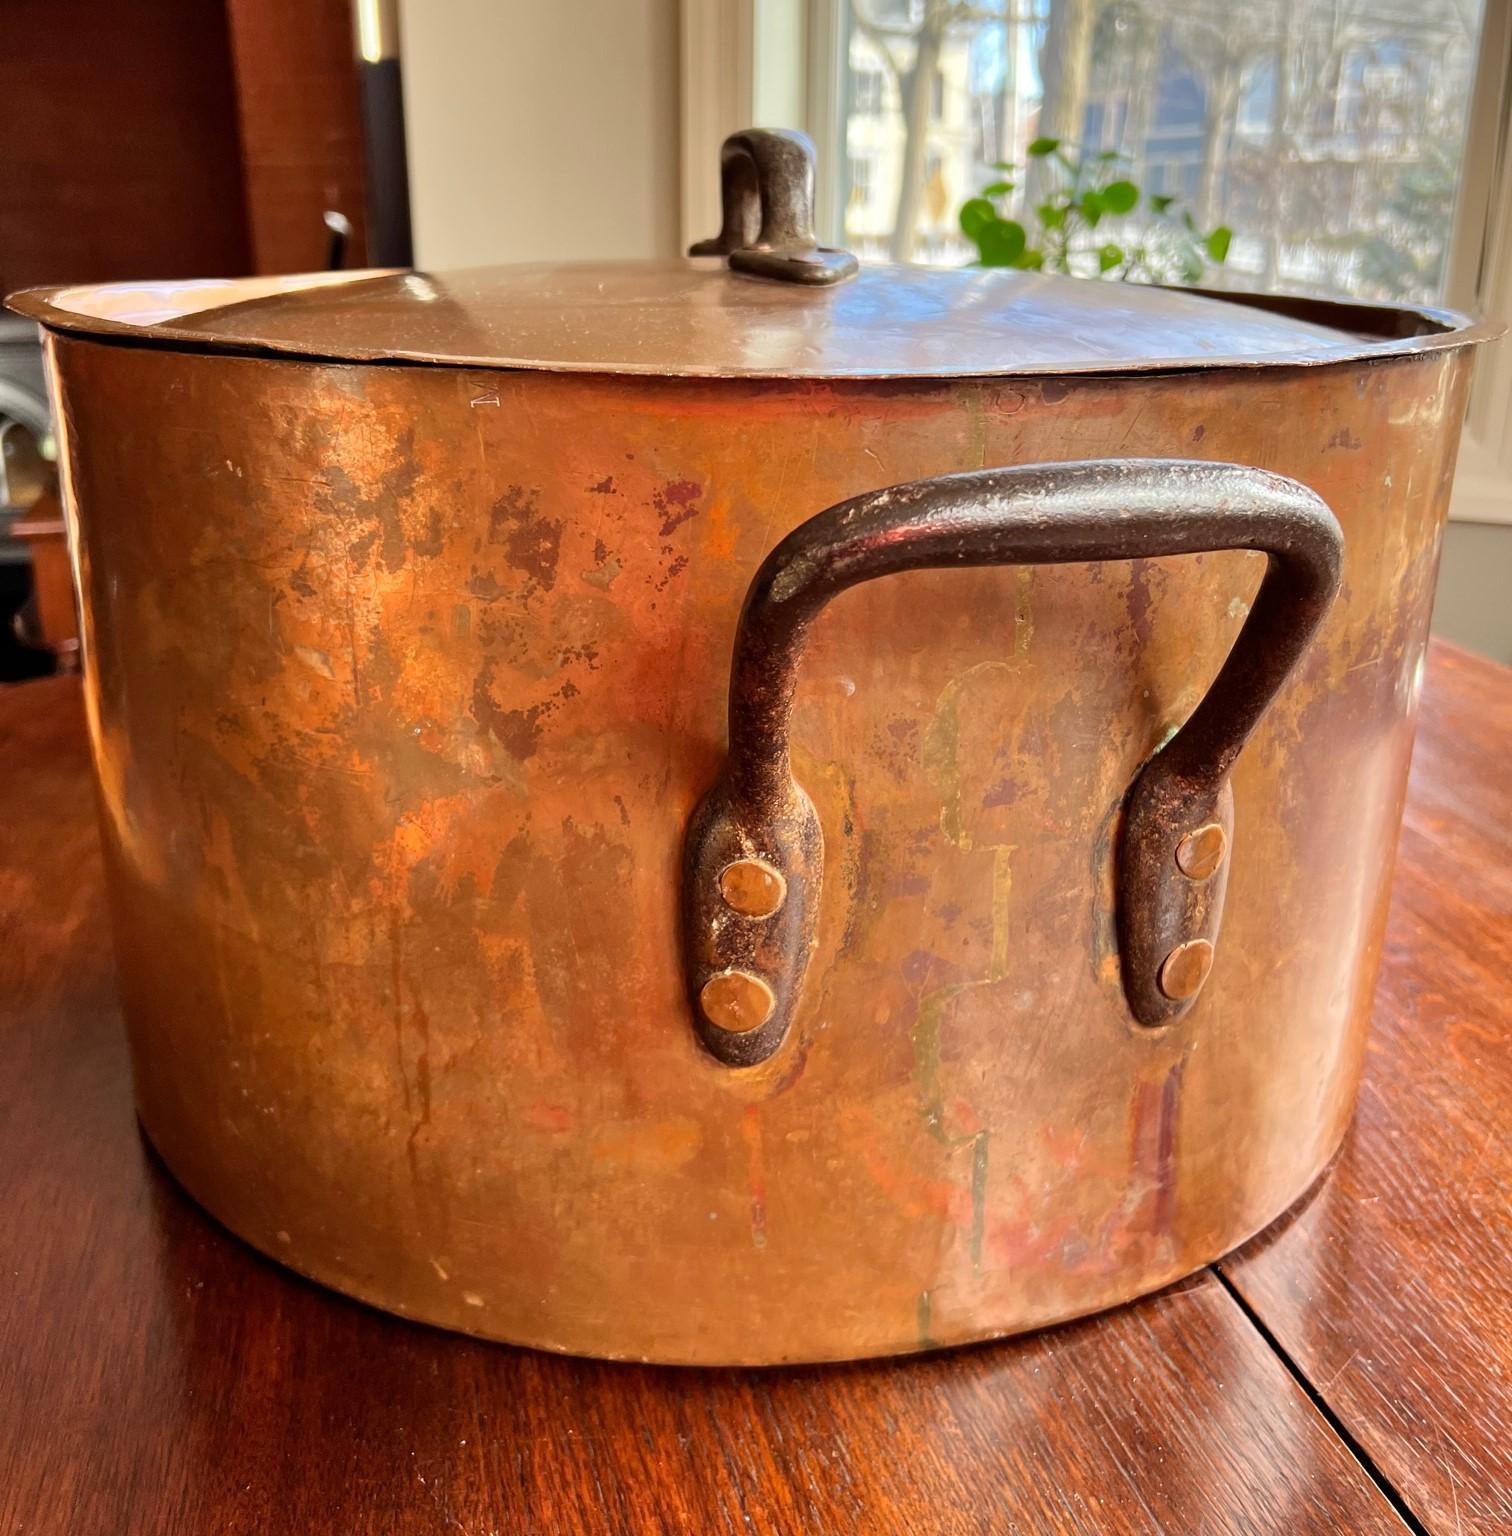 Forged Enormous Hand Crafted Antique Copper Stock Pot with Lid, Duparquet, New York